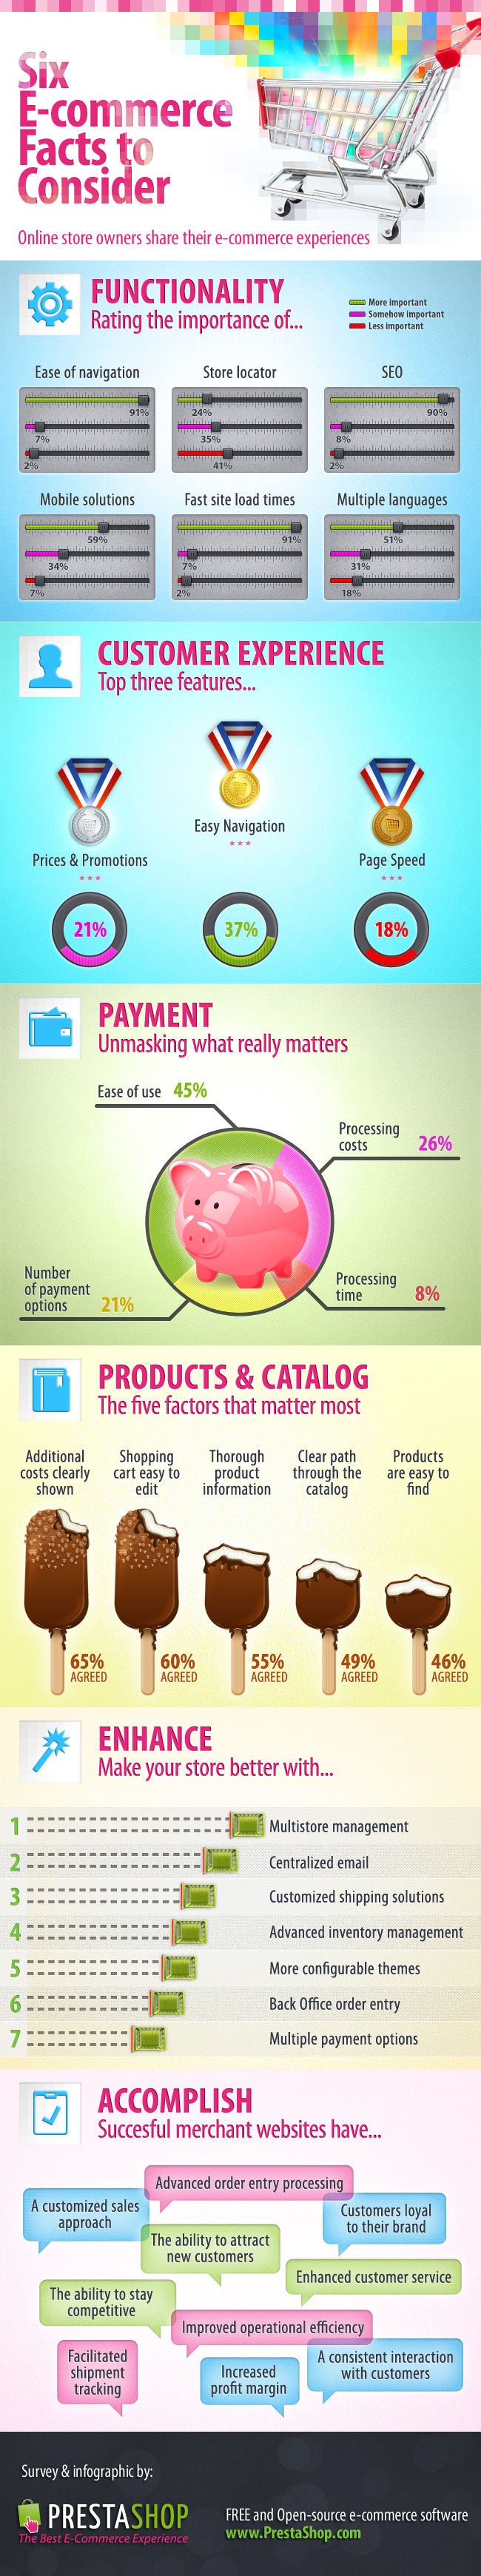 eCommerce Features to Consider [Infographic]